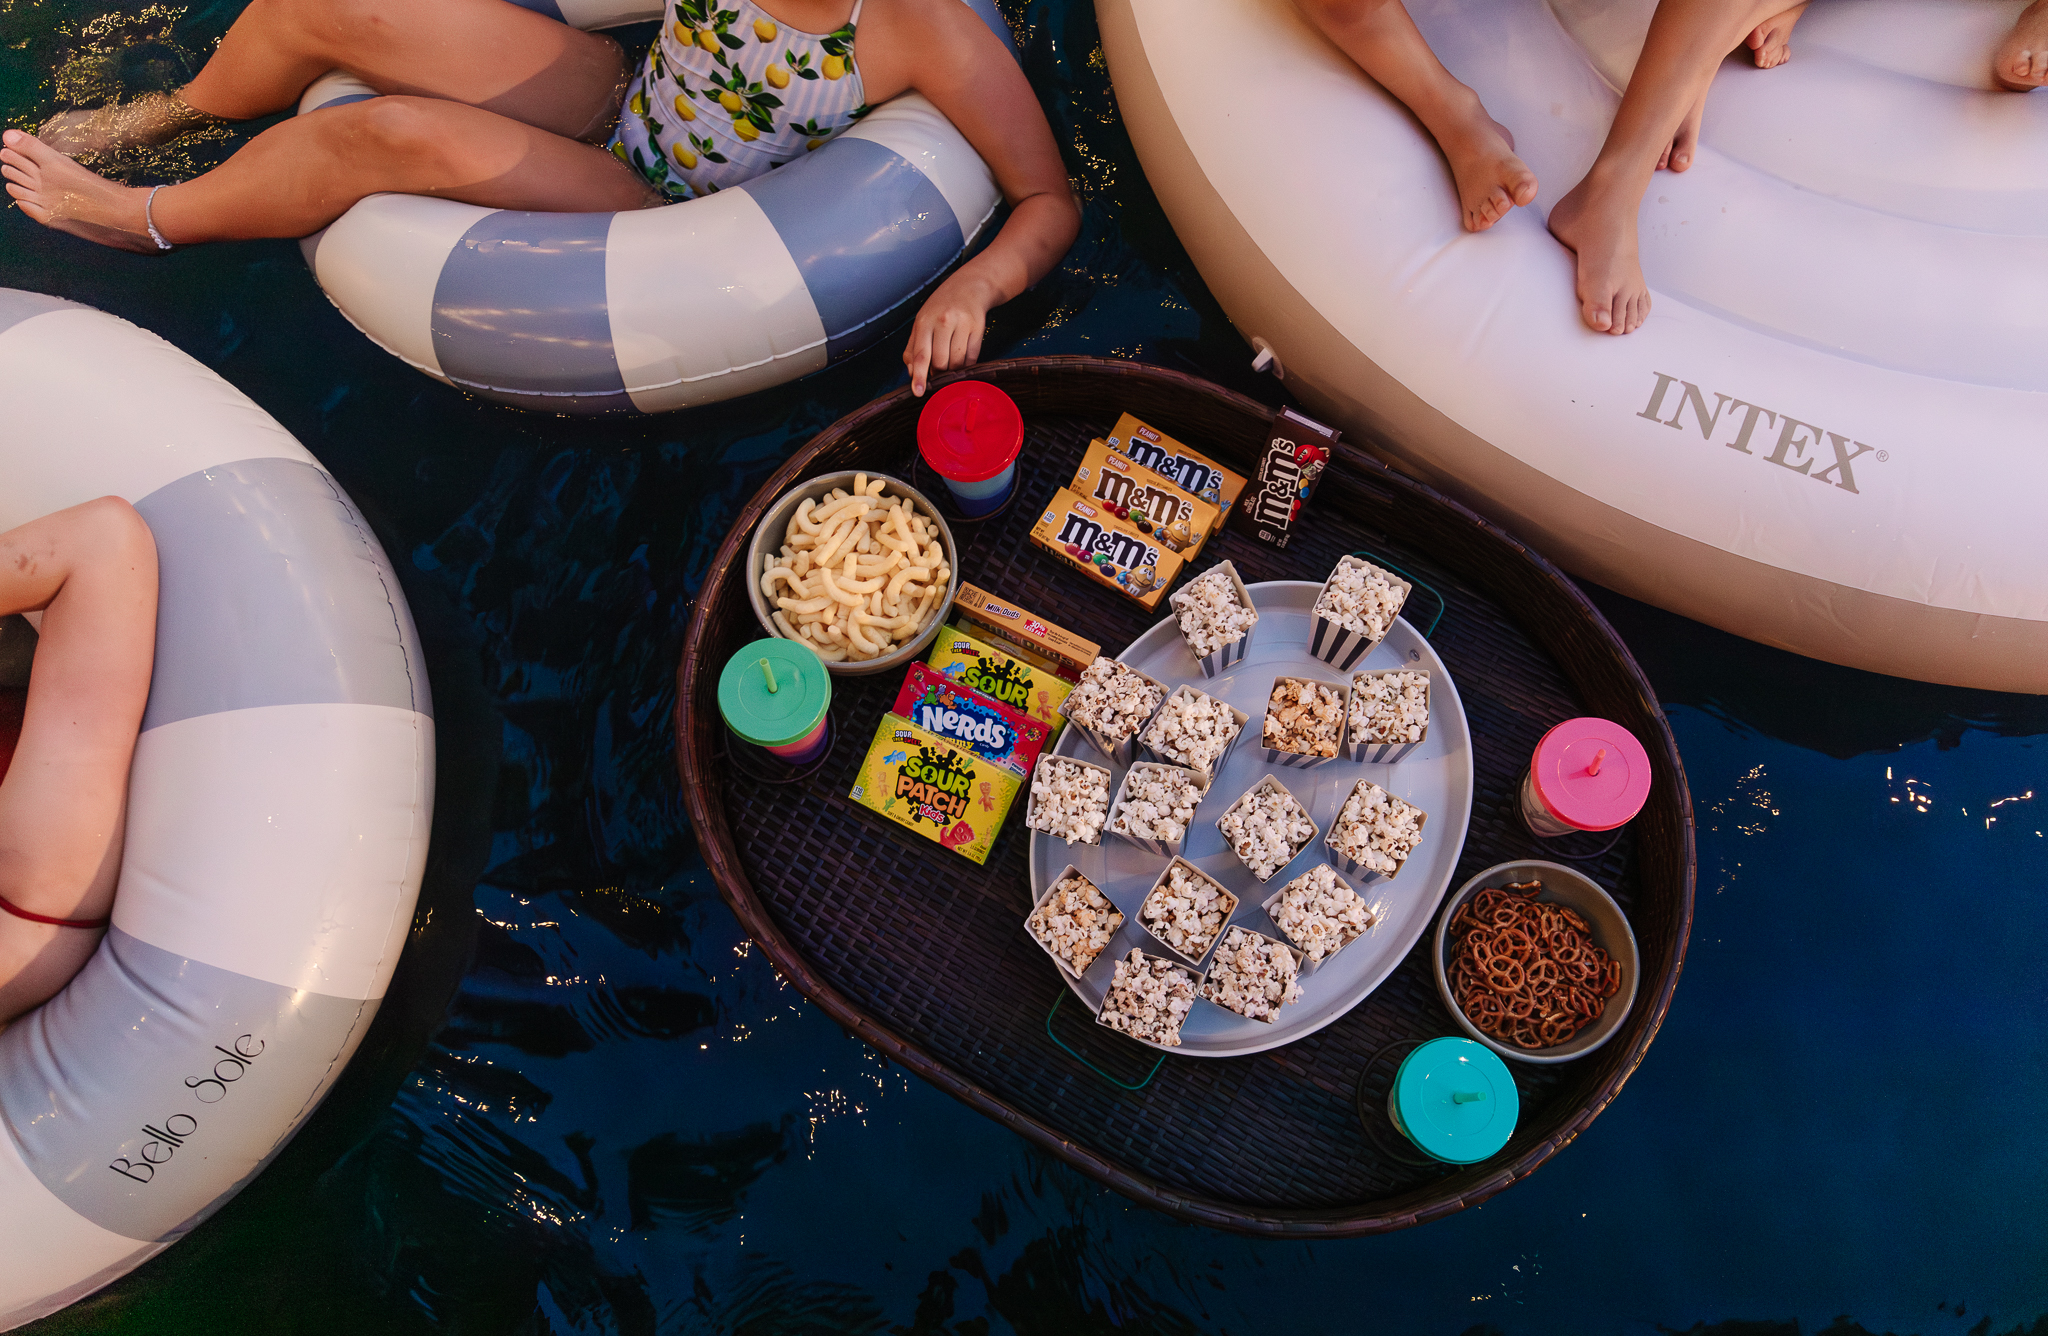 Chris Loves Julia | Outdoor movie pool party snacks in a floating tray